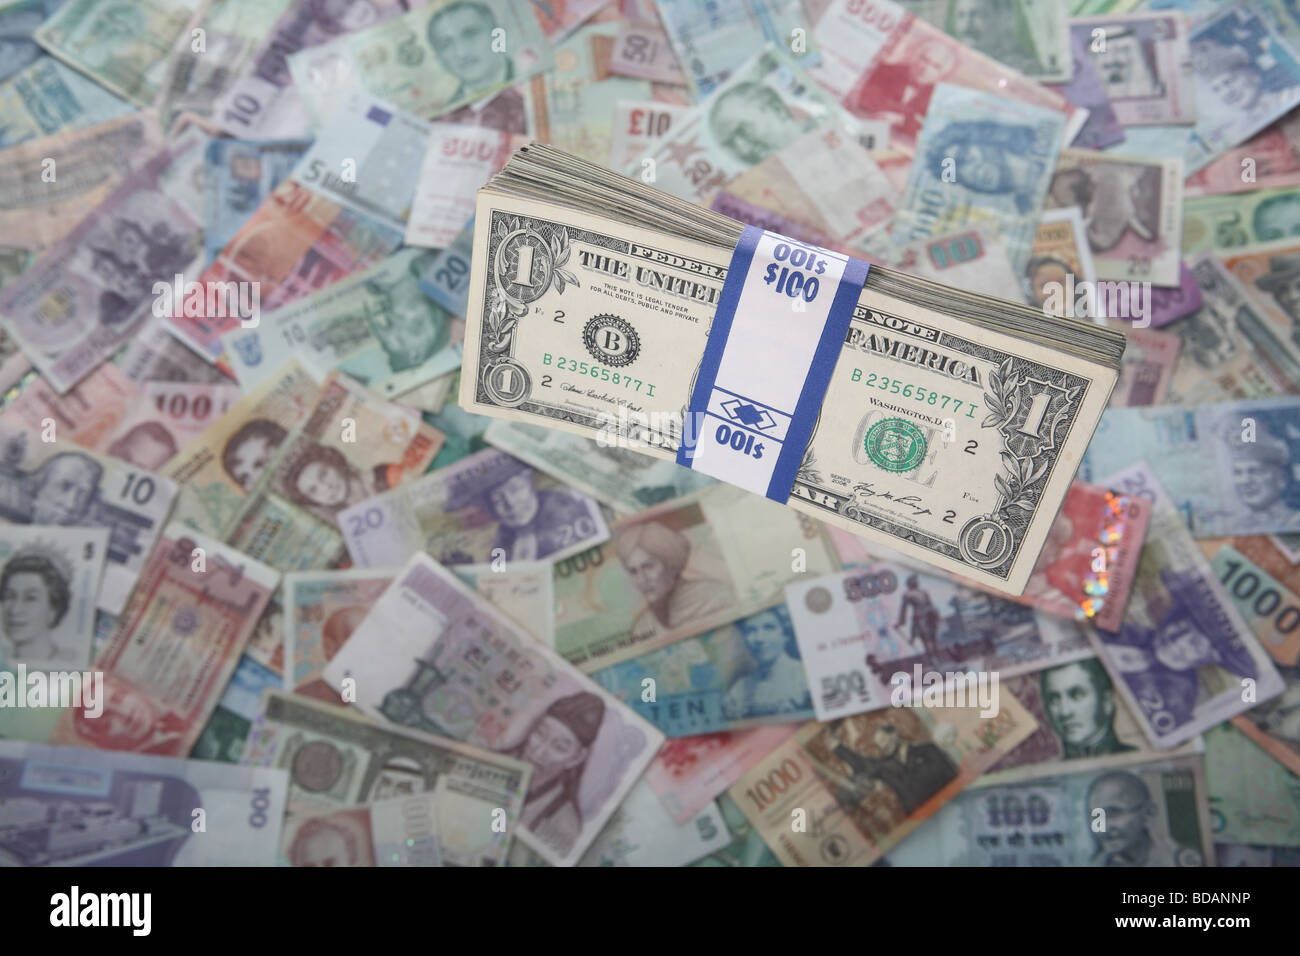 A bundled stack of one dollar bills on a soft background of international currencies Stock Photo